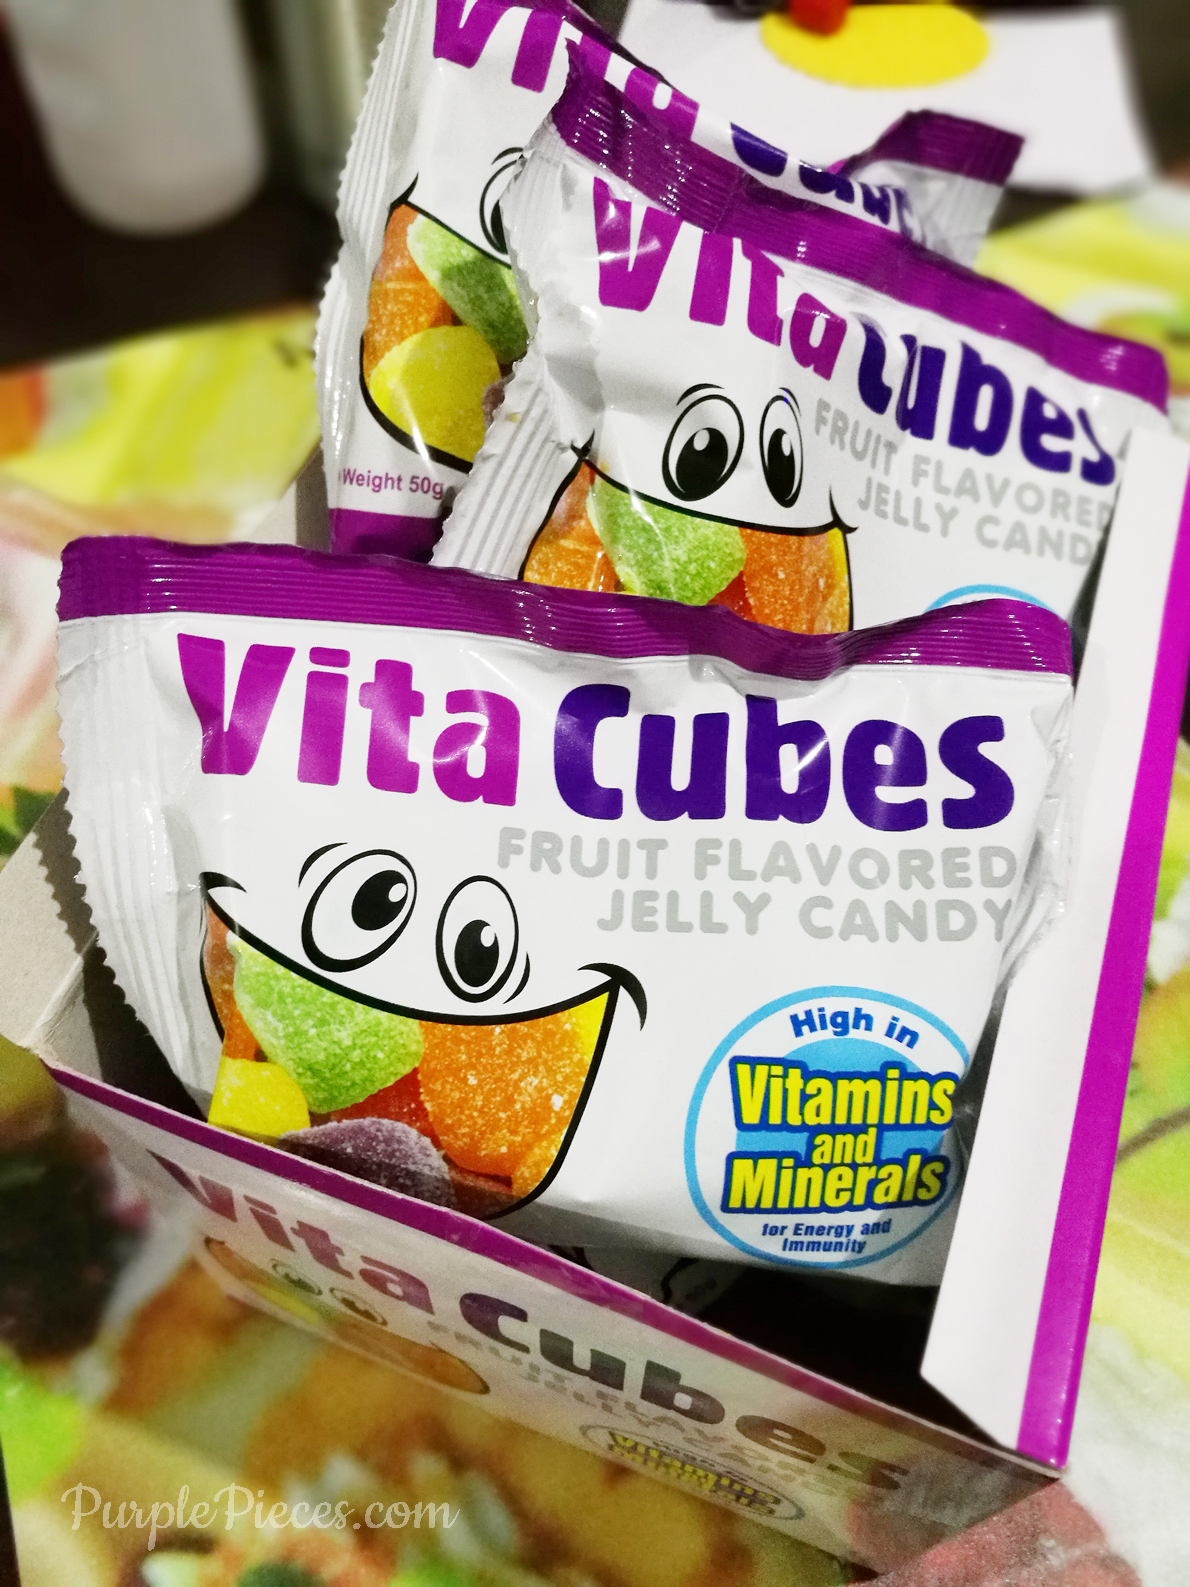 Why Vita Cubes Jelly Candy is 2Good for my Kids